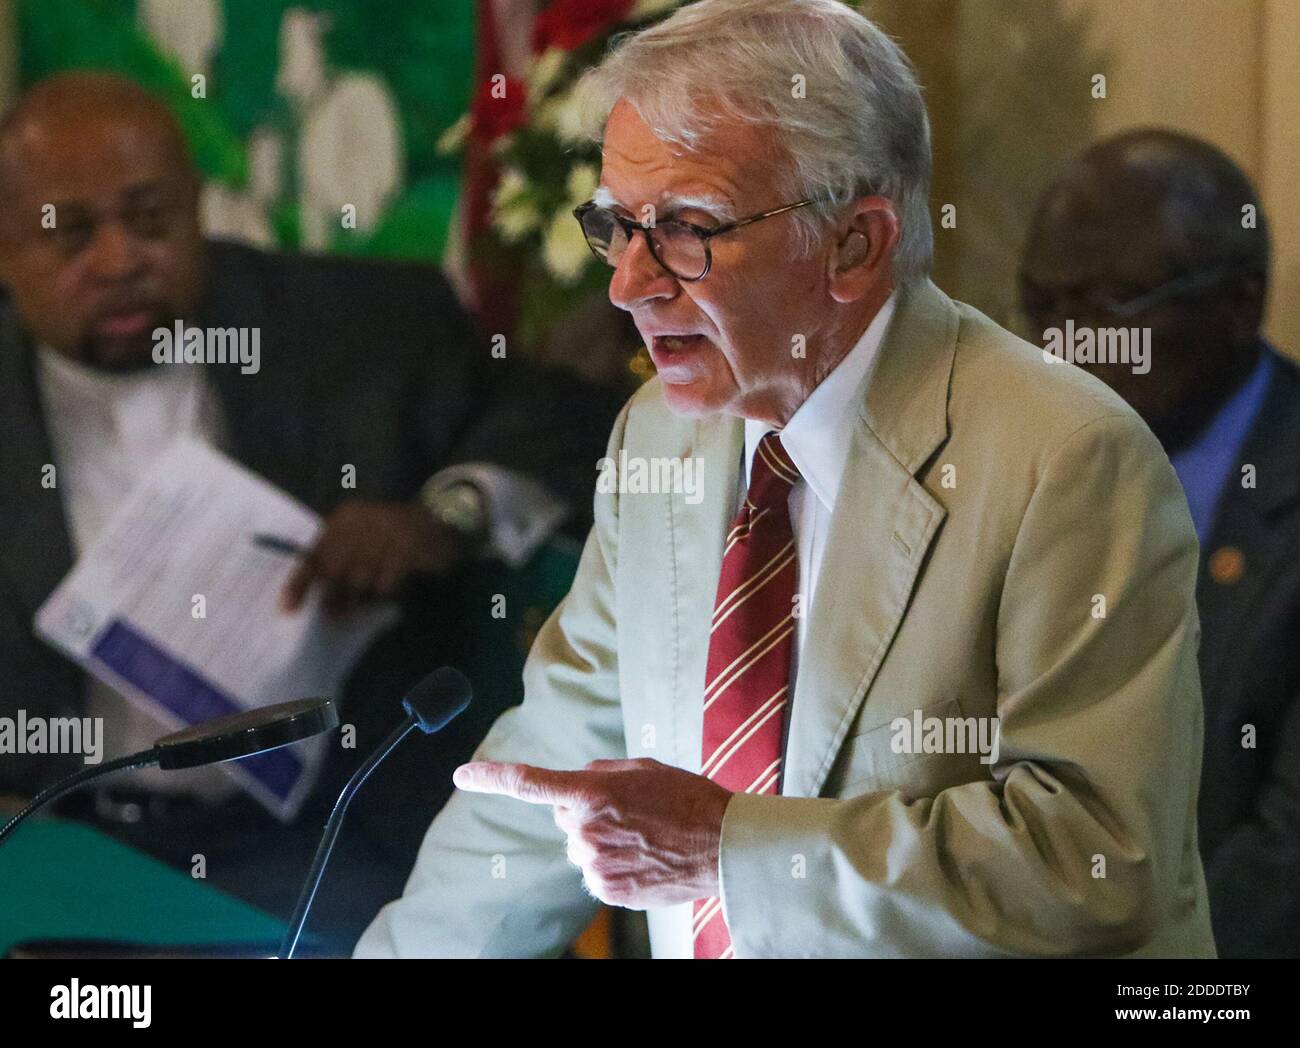 NO FILM, NO VIDEO, NO TV, NO DOCUMENTARY - Charleston mayor Joe Riley speaks during a vigil at Morris Brown AME Church on June 18, 2015 for the nine people who were killed by a gunman in Emanuel AME Church in Charleston, SC, USA. Photo by Tim Dominick/The State/TNS/ABACAPRESS.COM Stock Photo